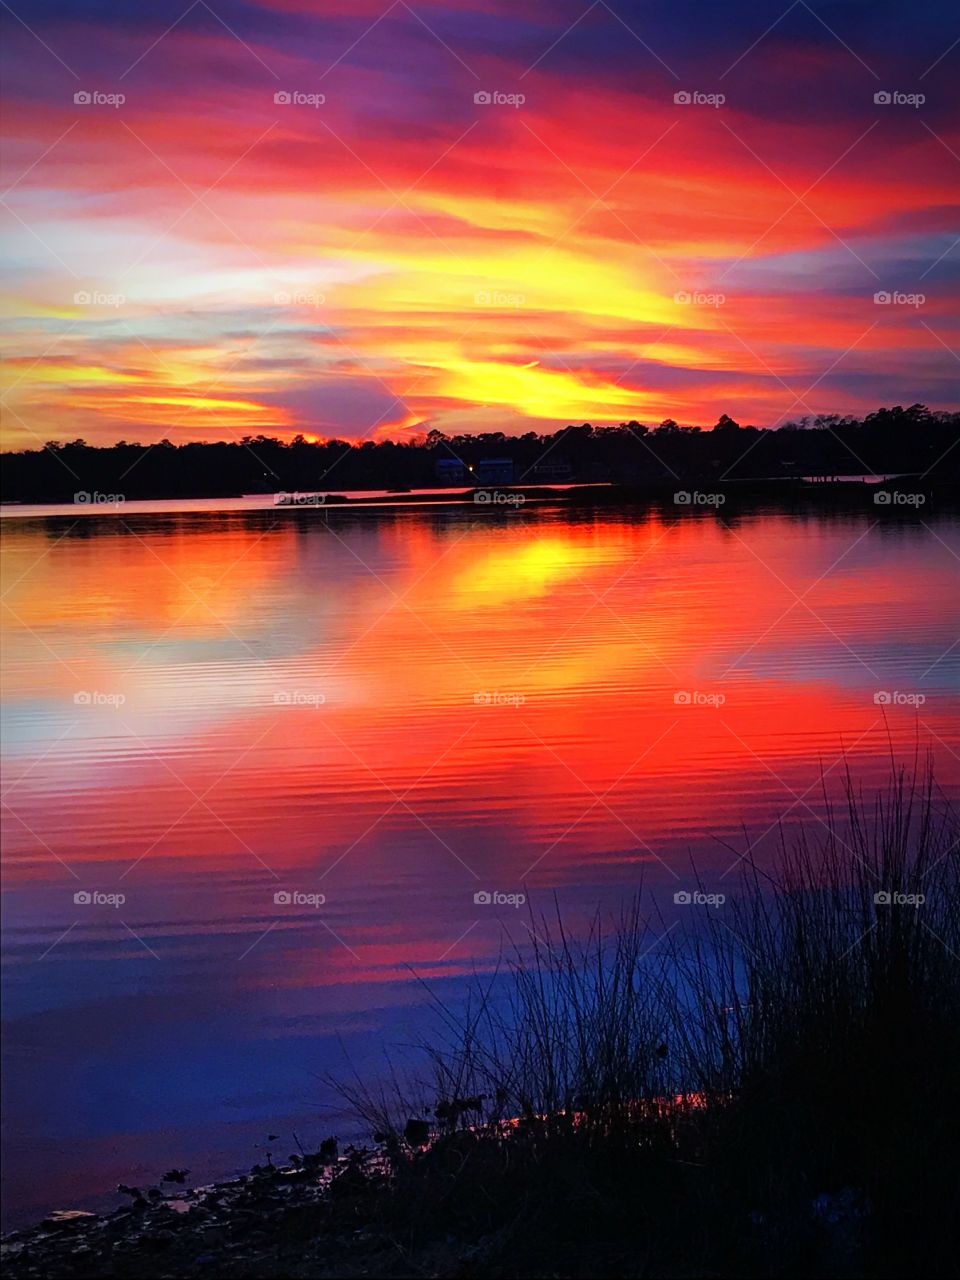 Swansboro NC sunset full of colors and reflections 